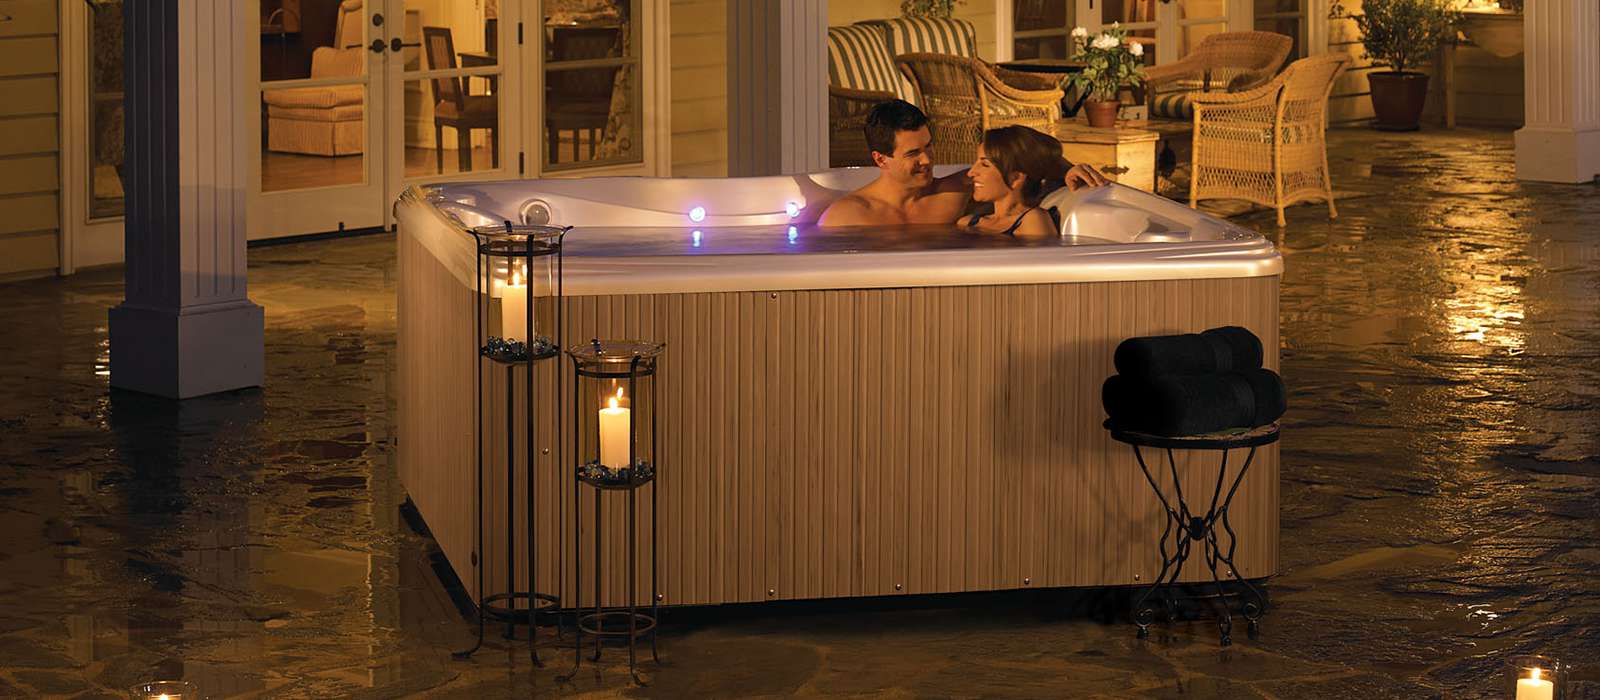 Enhance your spa experience with the Relay’s multi-color LED lighting system and therapeutic waterfall. Add an optional wireless TV and sound system to watch your favorite shows and listen to music while you soak. 